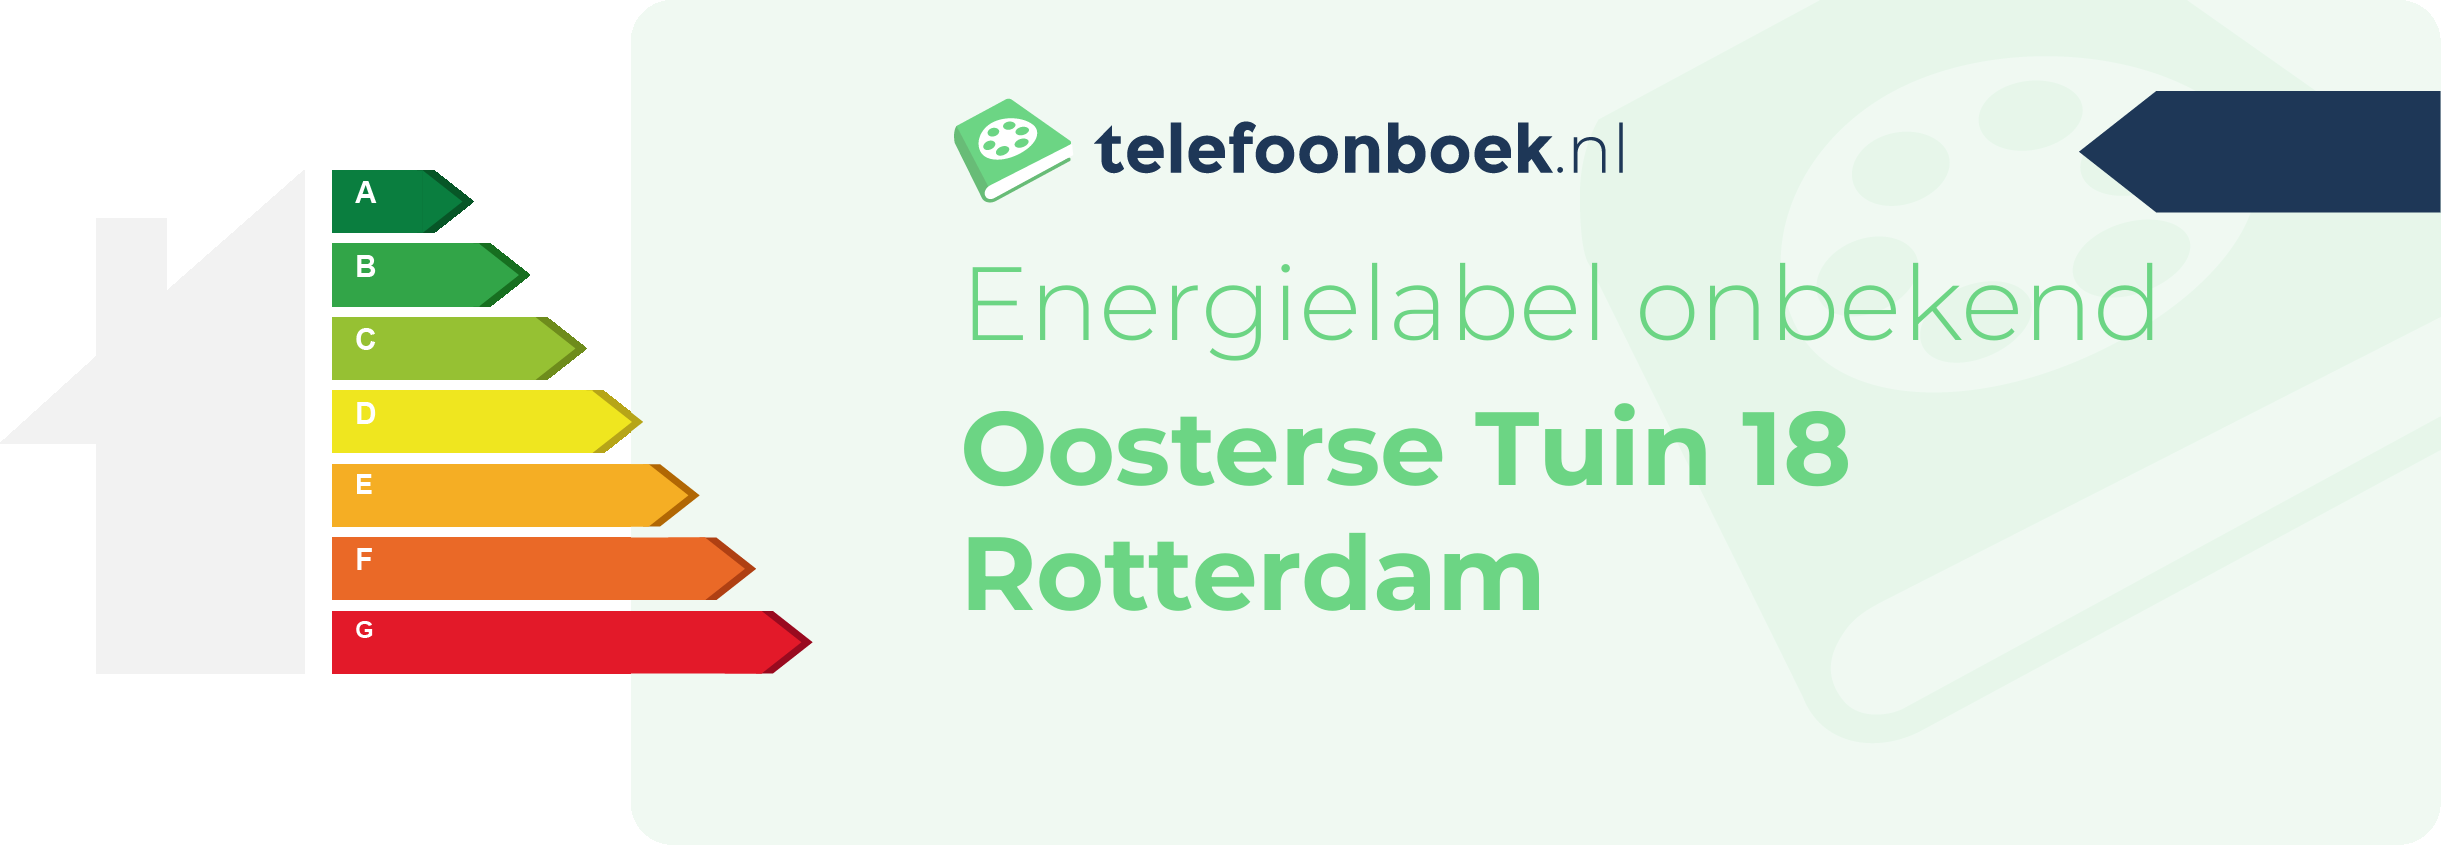 Energielabel Oosterse Tuin 18 Rotterdam